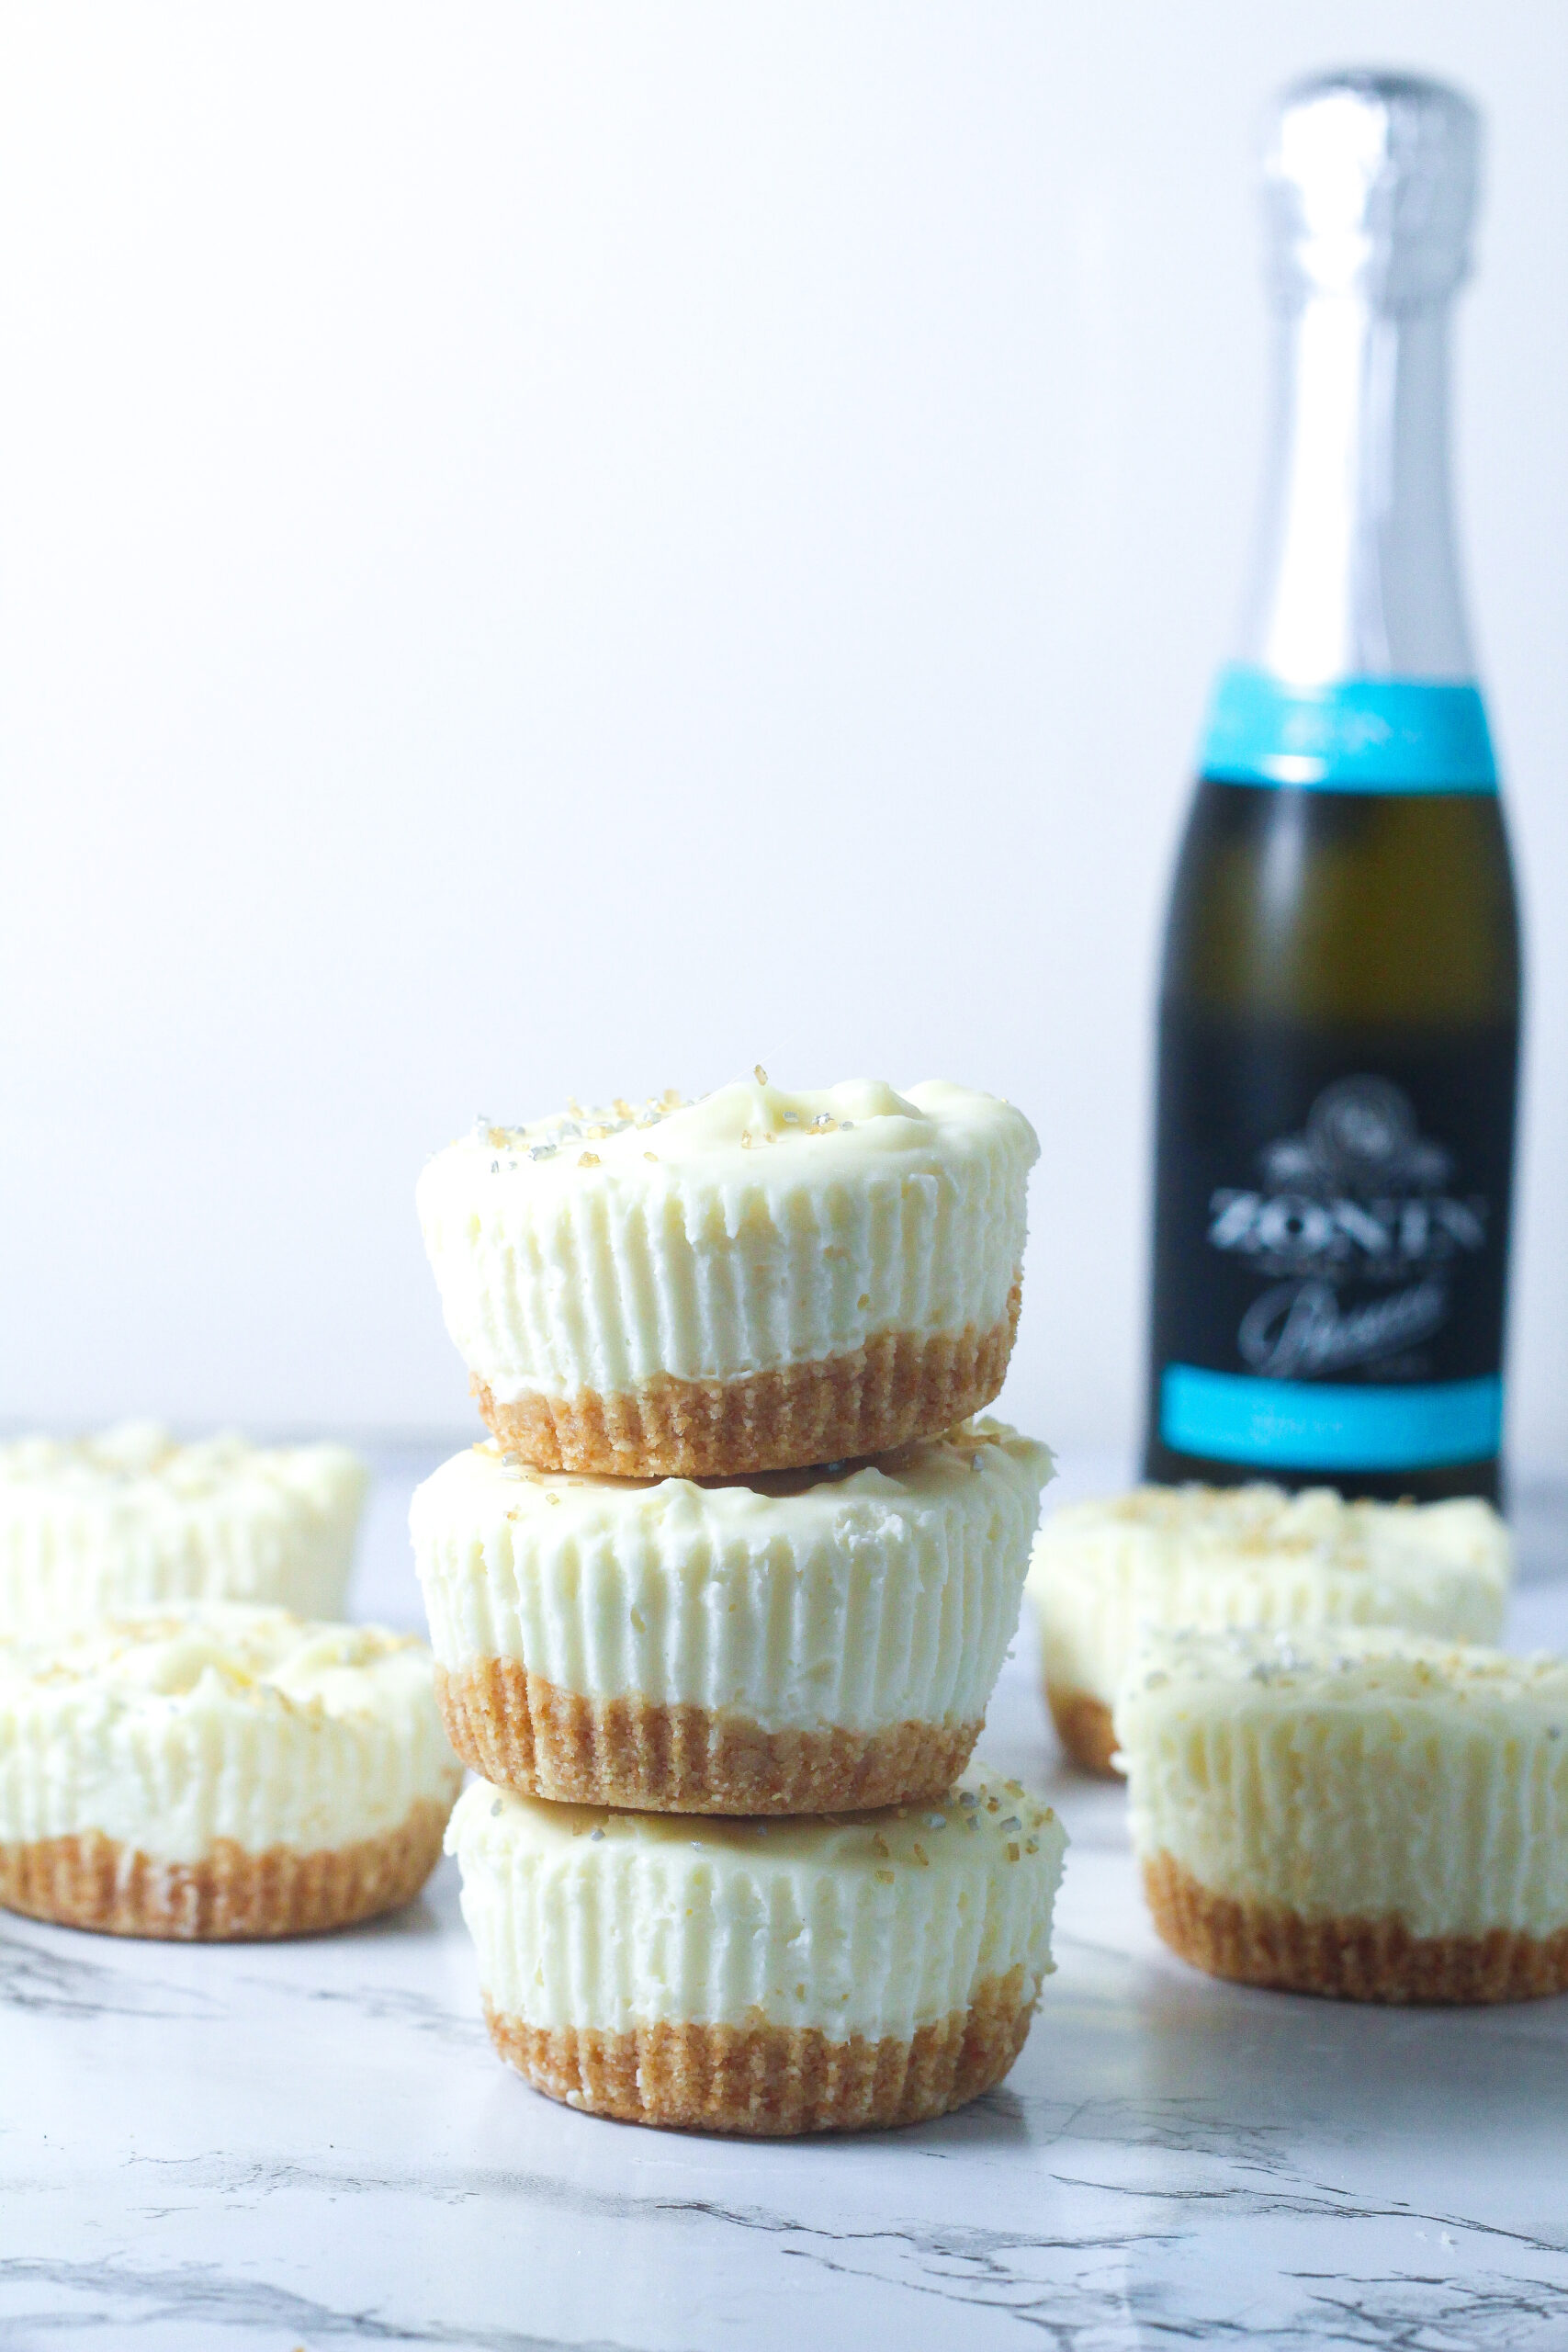 side view of a stack of 3 prosecco cheesecakes with other prosecco cheesecakes behind it and a mini bottle of prosecco in the back right of image